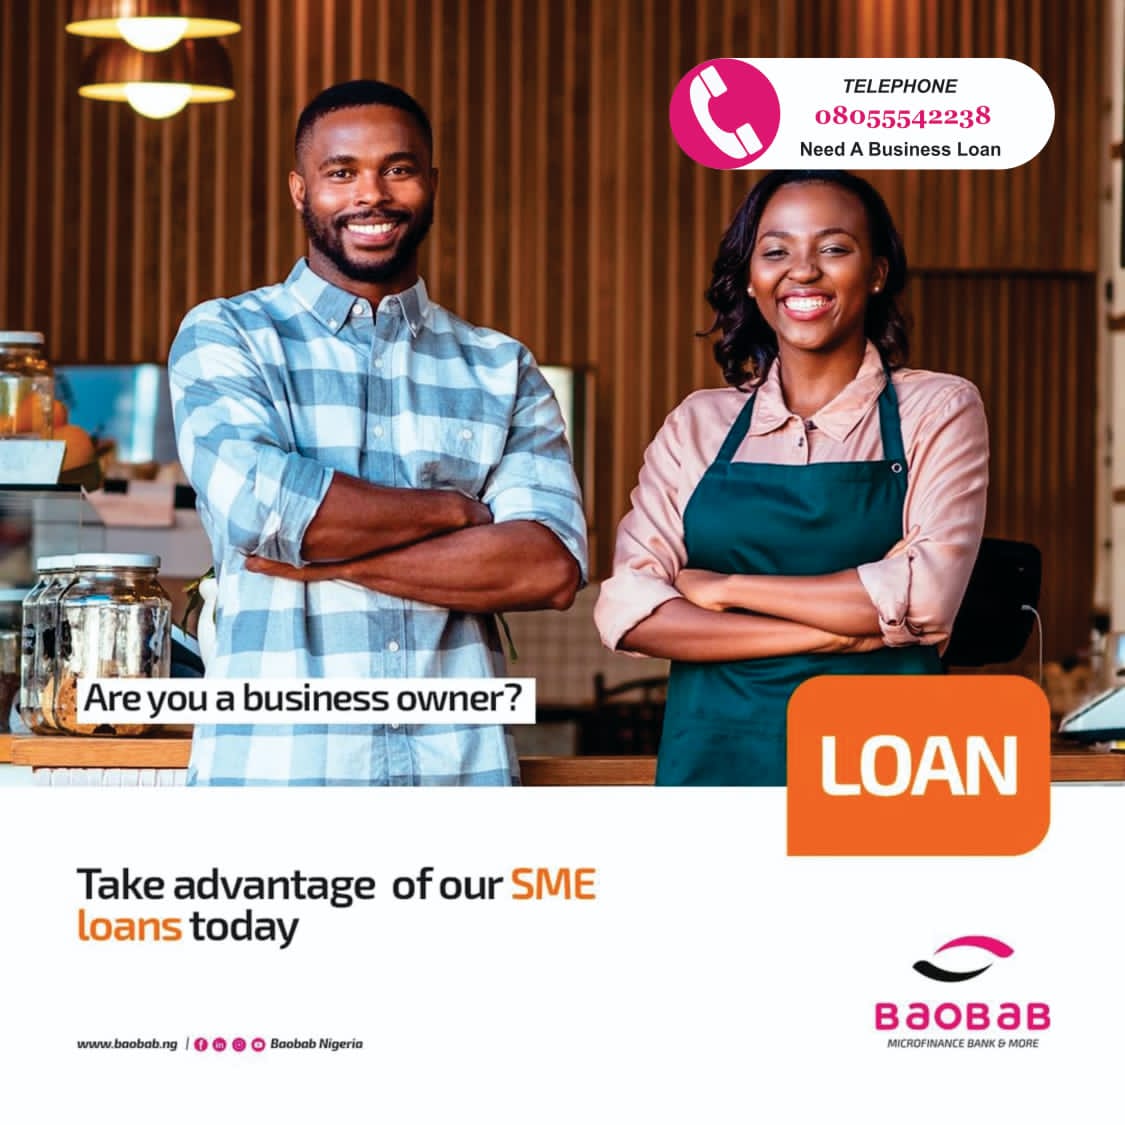 introducing-baobab-microfinance-bank-loans-to-businesses-in-onitsha-business-nigeria